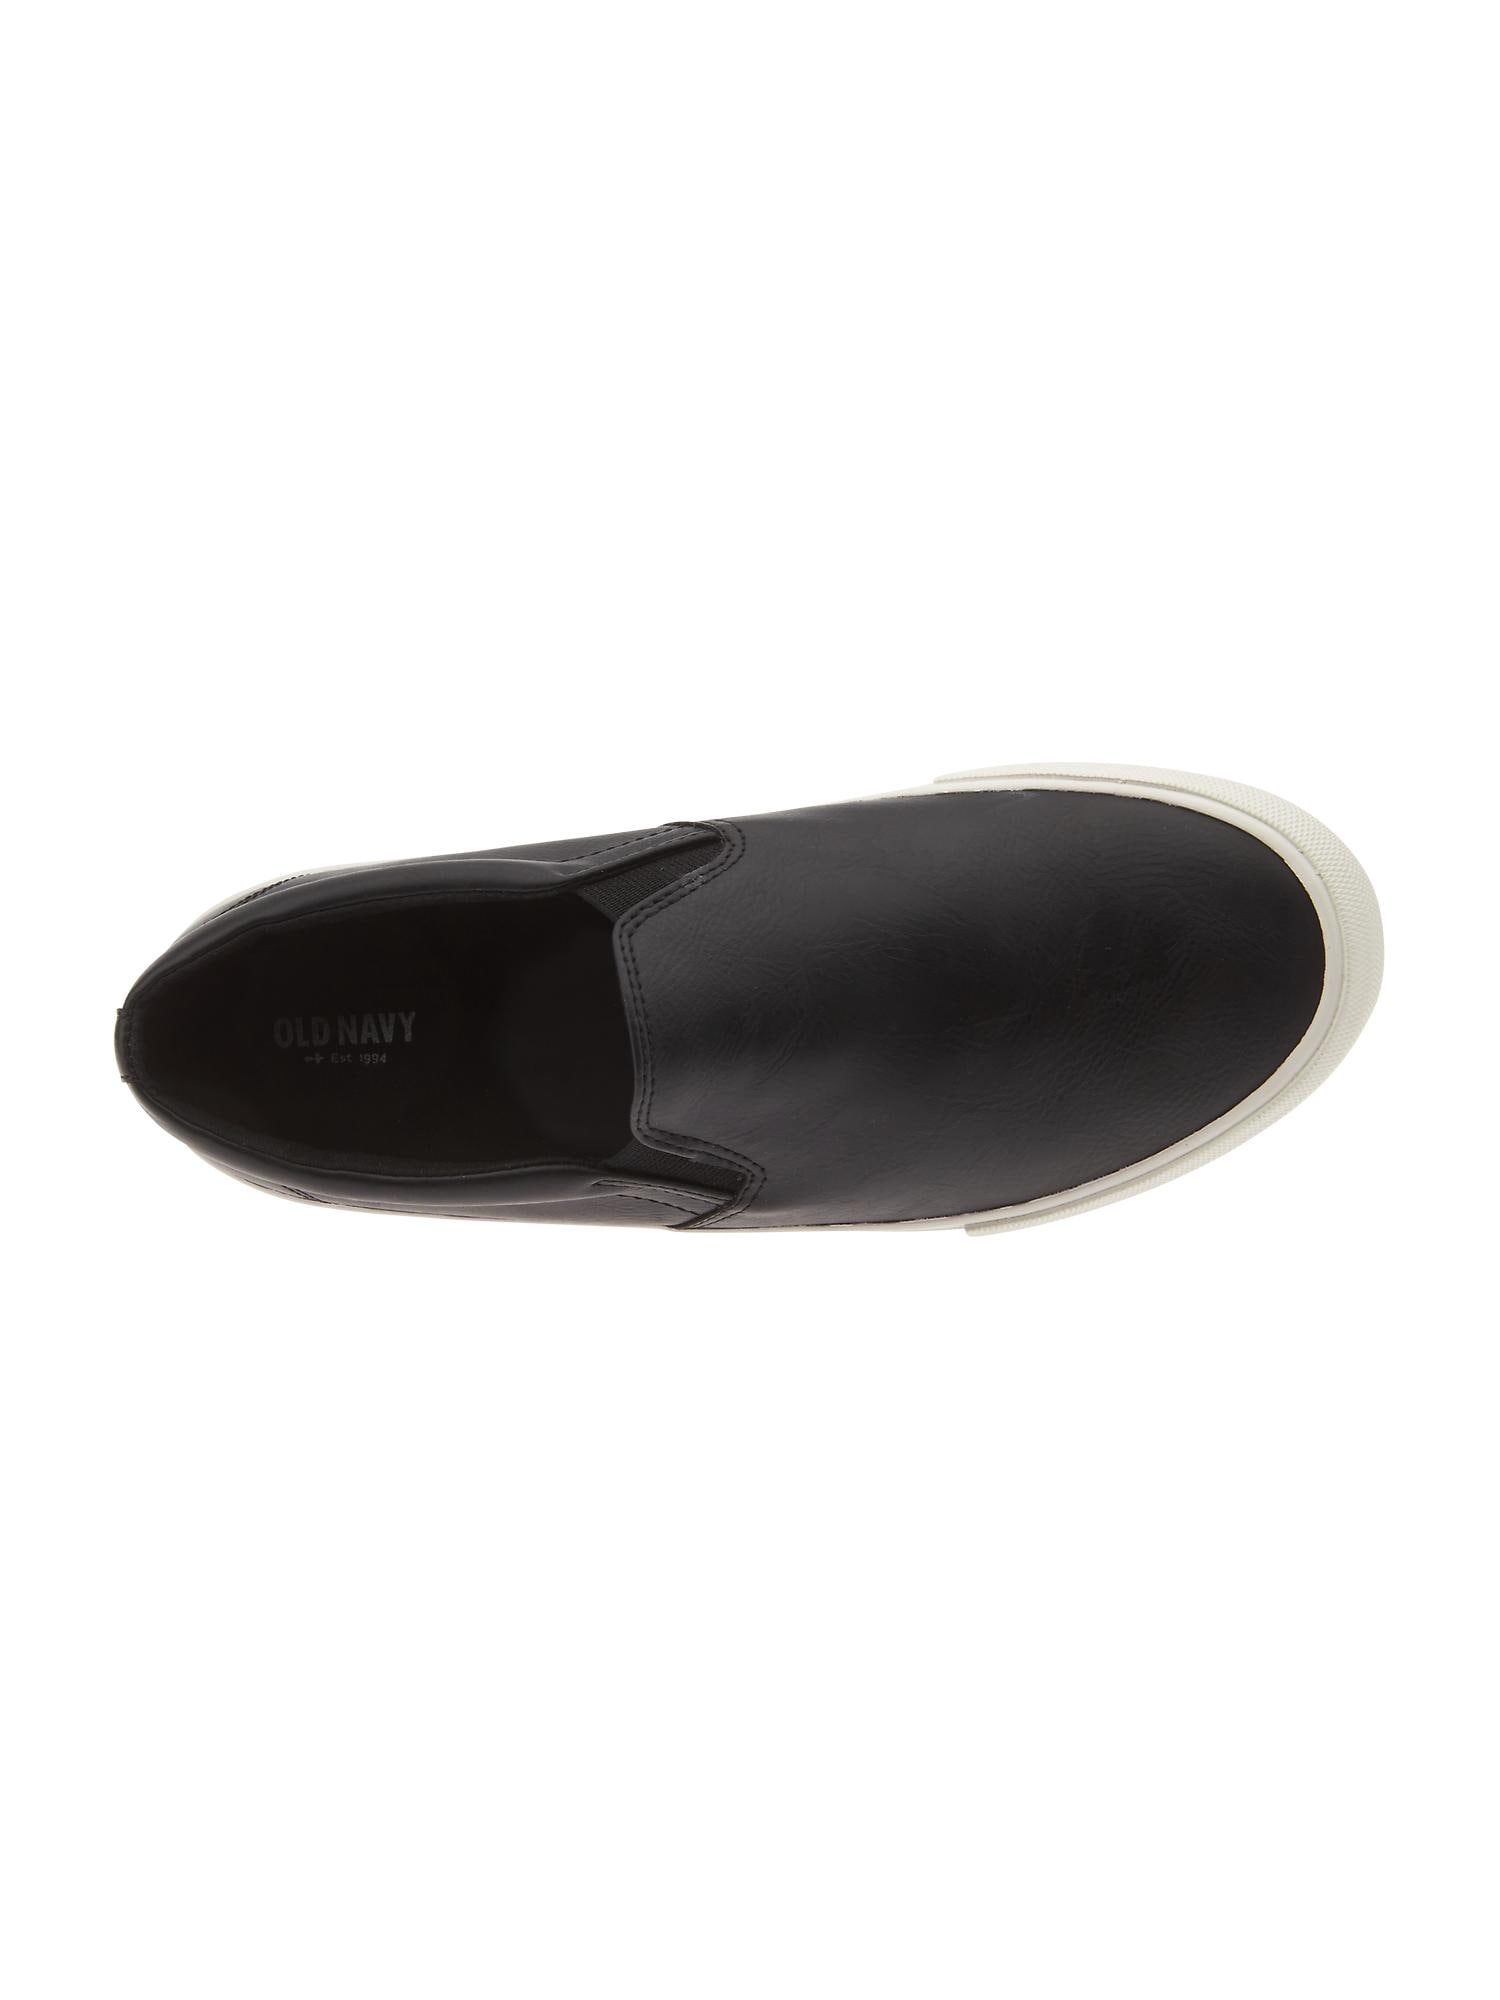 Women's Faux-Leather Slip-Ons | Old Navy